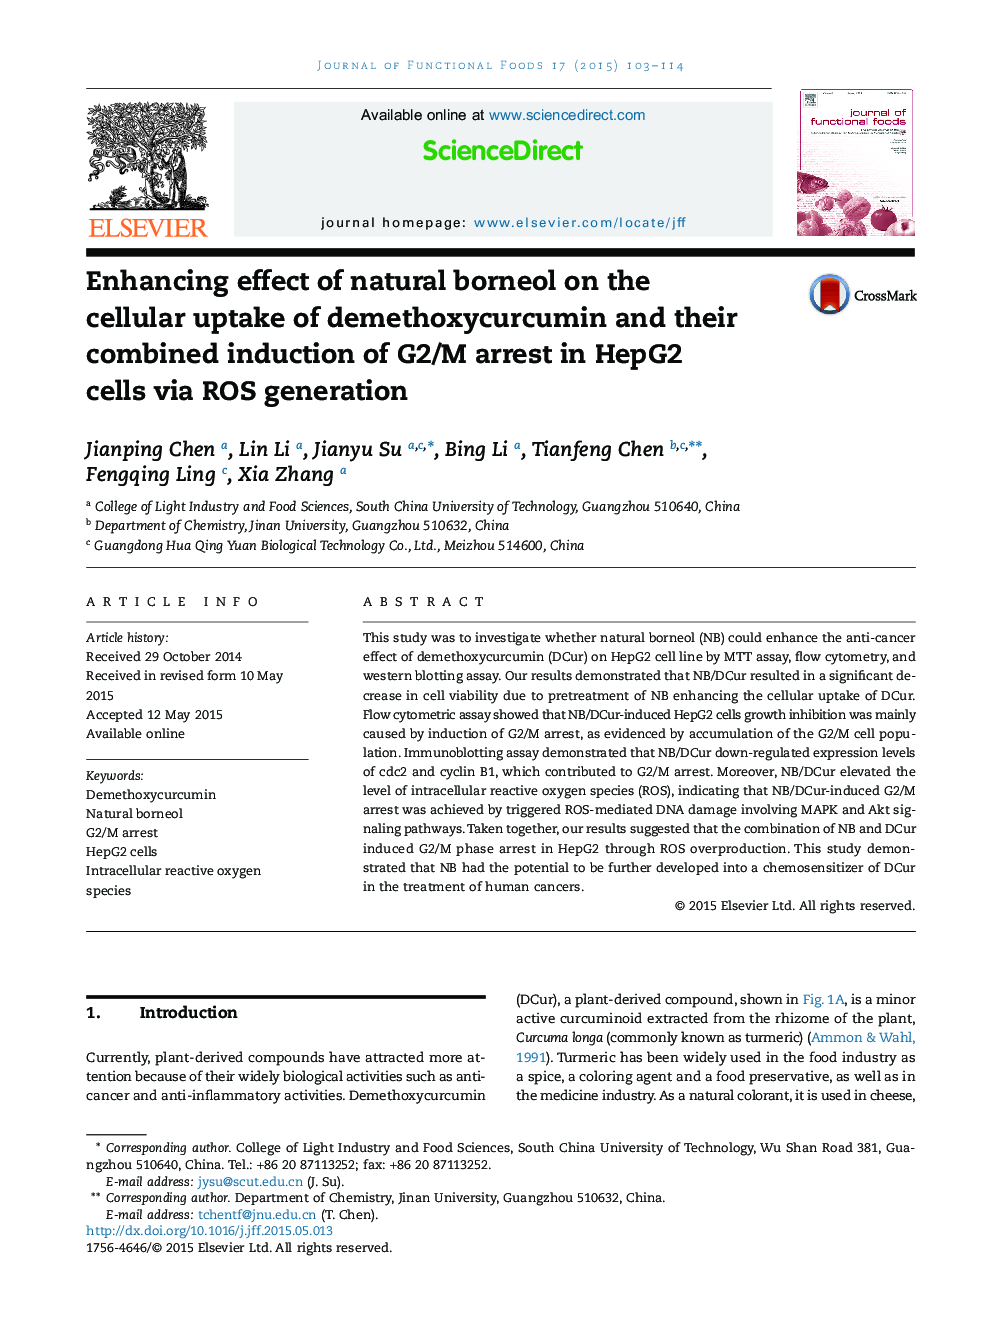 Enhancing effect of natural borneol on the cellular uptake of demethoxycurcumin and their combined induction of G2/M arrest in HepG2 cells via ROS generation